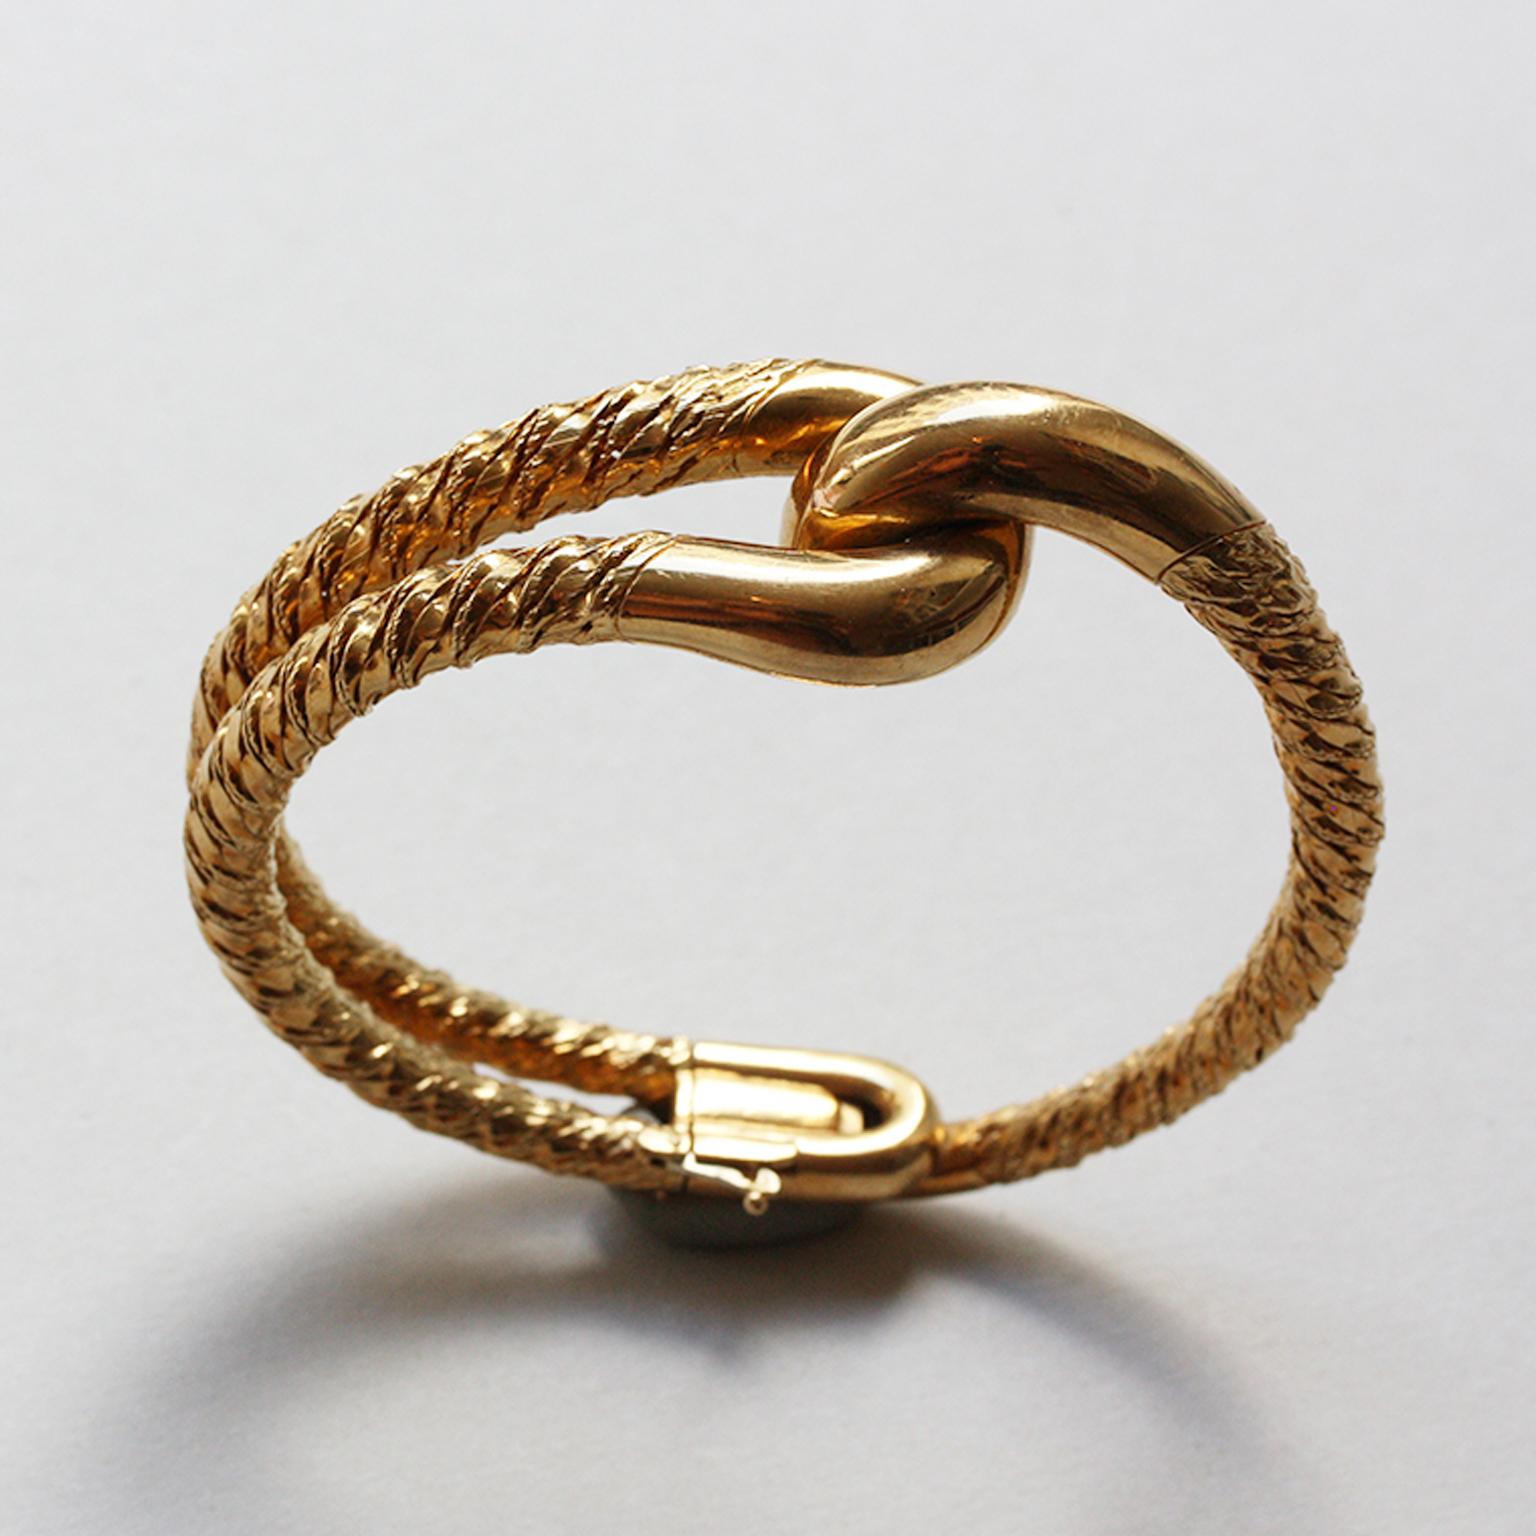 An important 18-carat gold knot bangle, signed and numbered: Cartier Paris, 016 053 by Georges Lenfant. And an 18-carat gold knot pinky ring of twisted thick gold wire. Signed and numbered: Cartier Paris, 36971. Both circa 1970, in their original